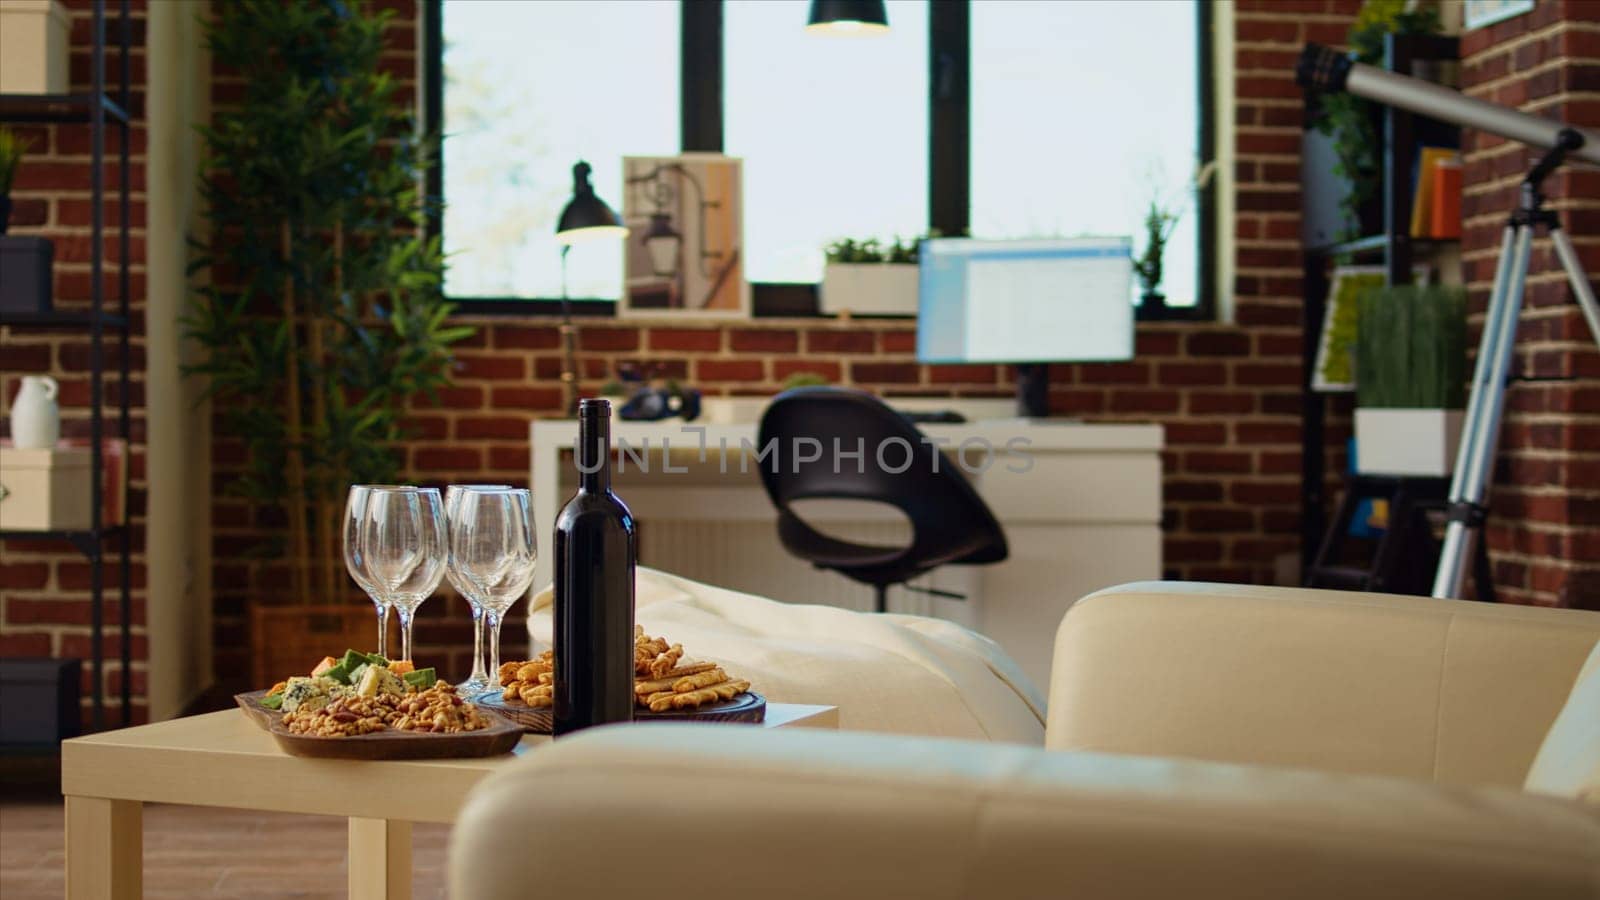 Panning shot of empty cozy apartment living room with appetizer platter and wine bottle on wooden table, awaiting guests to arrive. House interior with leather couch and TV running in background